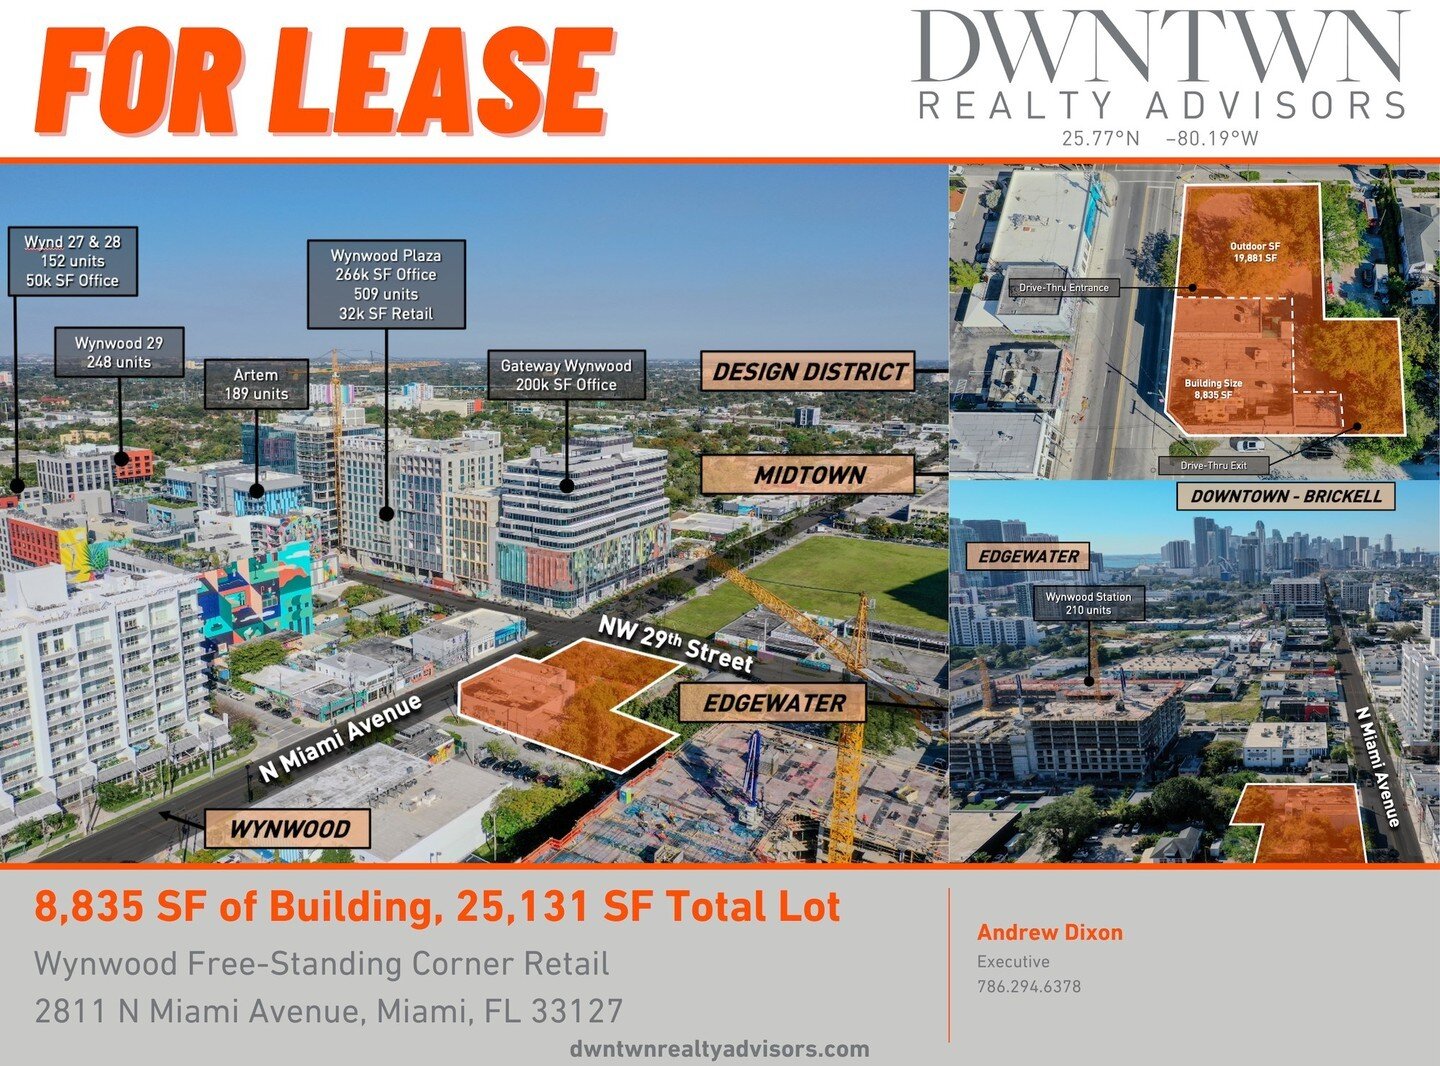 JUST LISTED FOR LEASE | Wynwood Free-Standing Corner Retail

DWNTWN Realty Advisors has been retained exclusively to arrange the leasing of 2811 North Miami Avenue in Miami, a 25,131 SF site at the nexus of Wynwood, Midtown and Edgewater. Available a